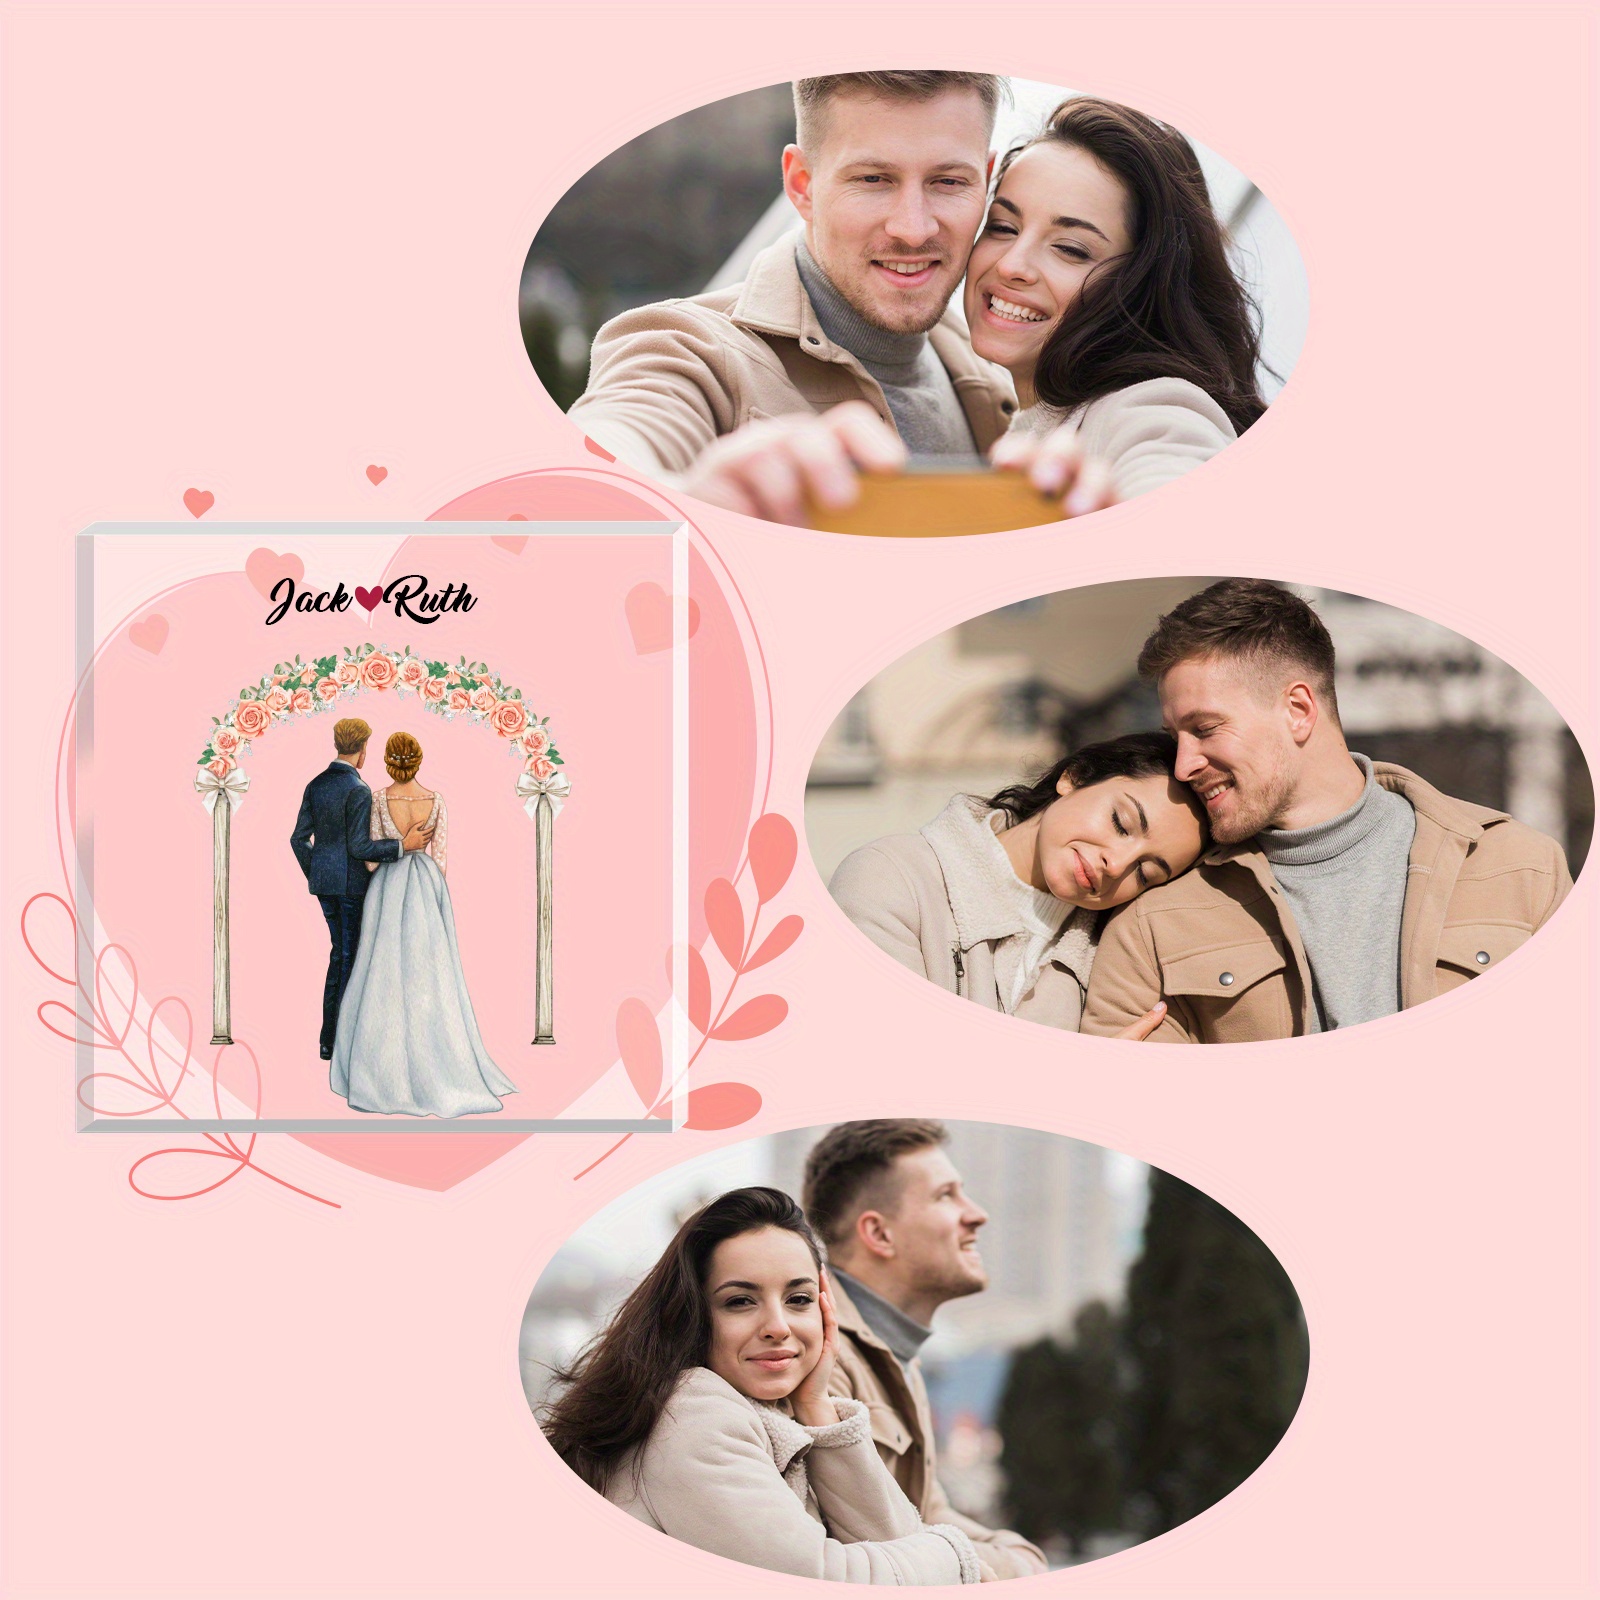 His Her Since Couples Anniversary Valentines - Personalized Photo